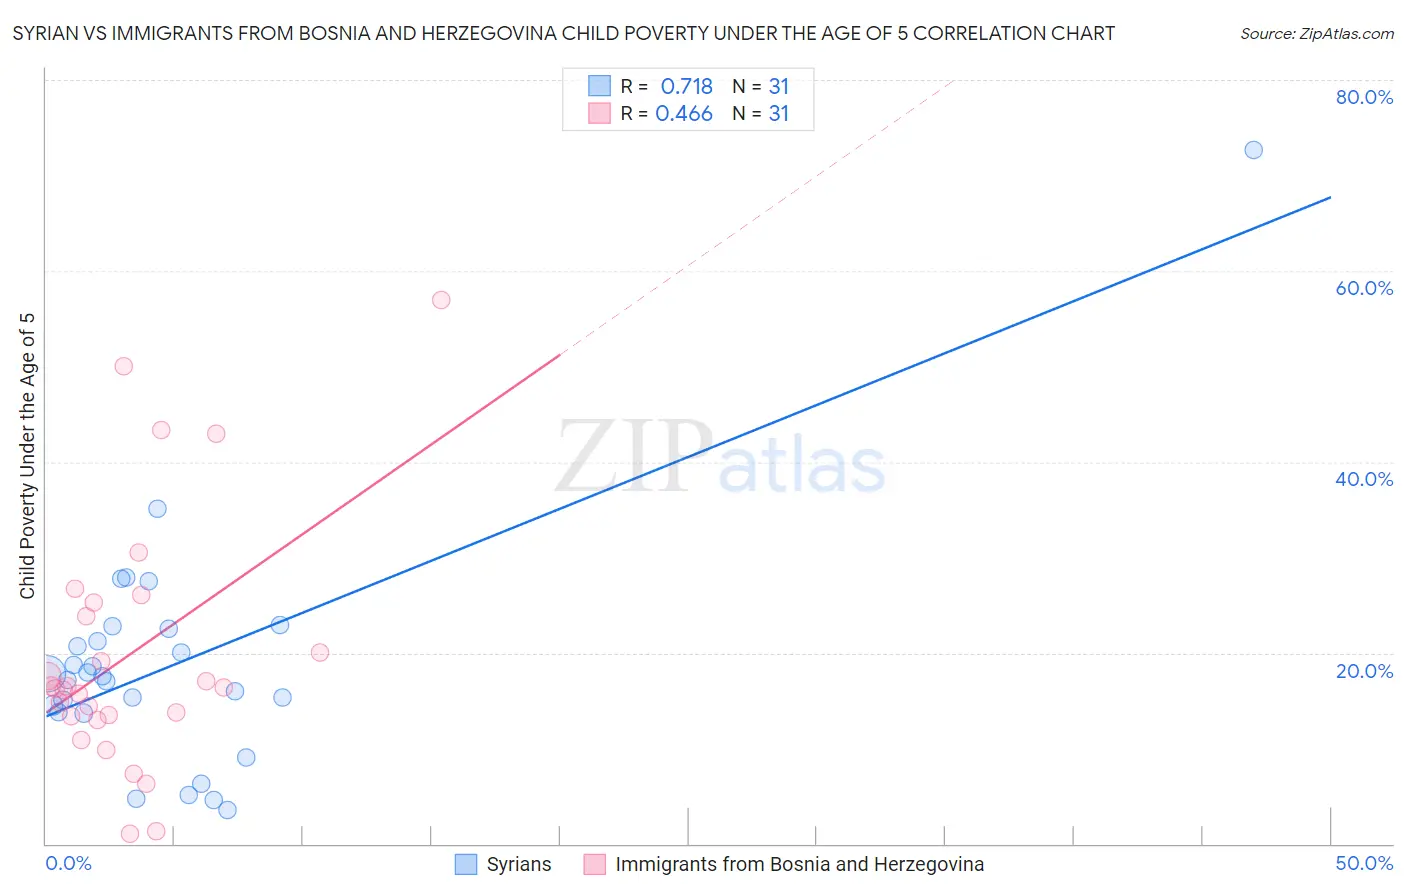 Syrian vs Immigrants from Bosnia and Herzegovina Child Poverty Under the Age of 5